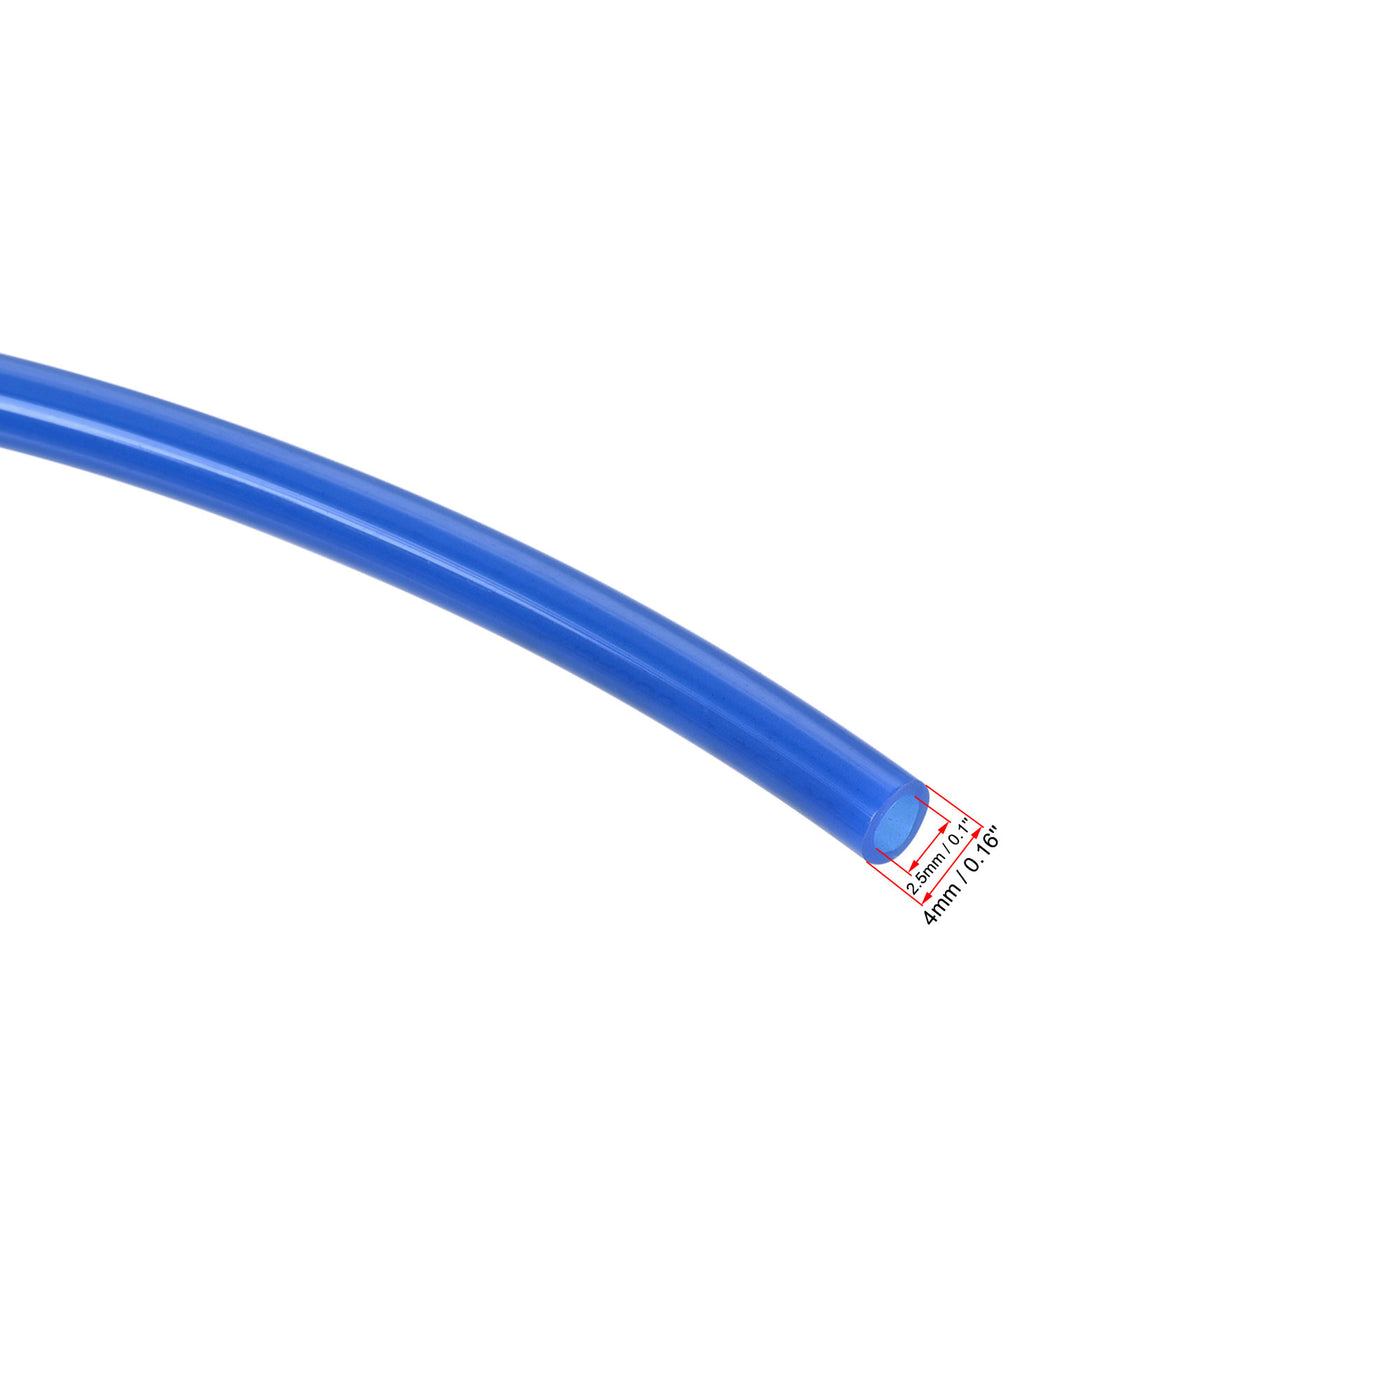 uxcell Uxcell Pneumatic 4mm OD PU Air Hose Tubing Kit 5M Blue with Push to Connect Fittings